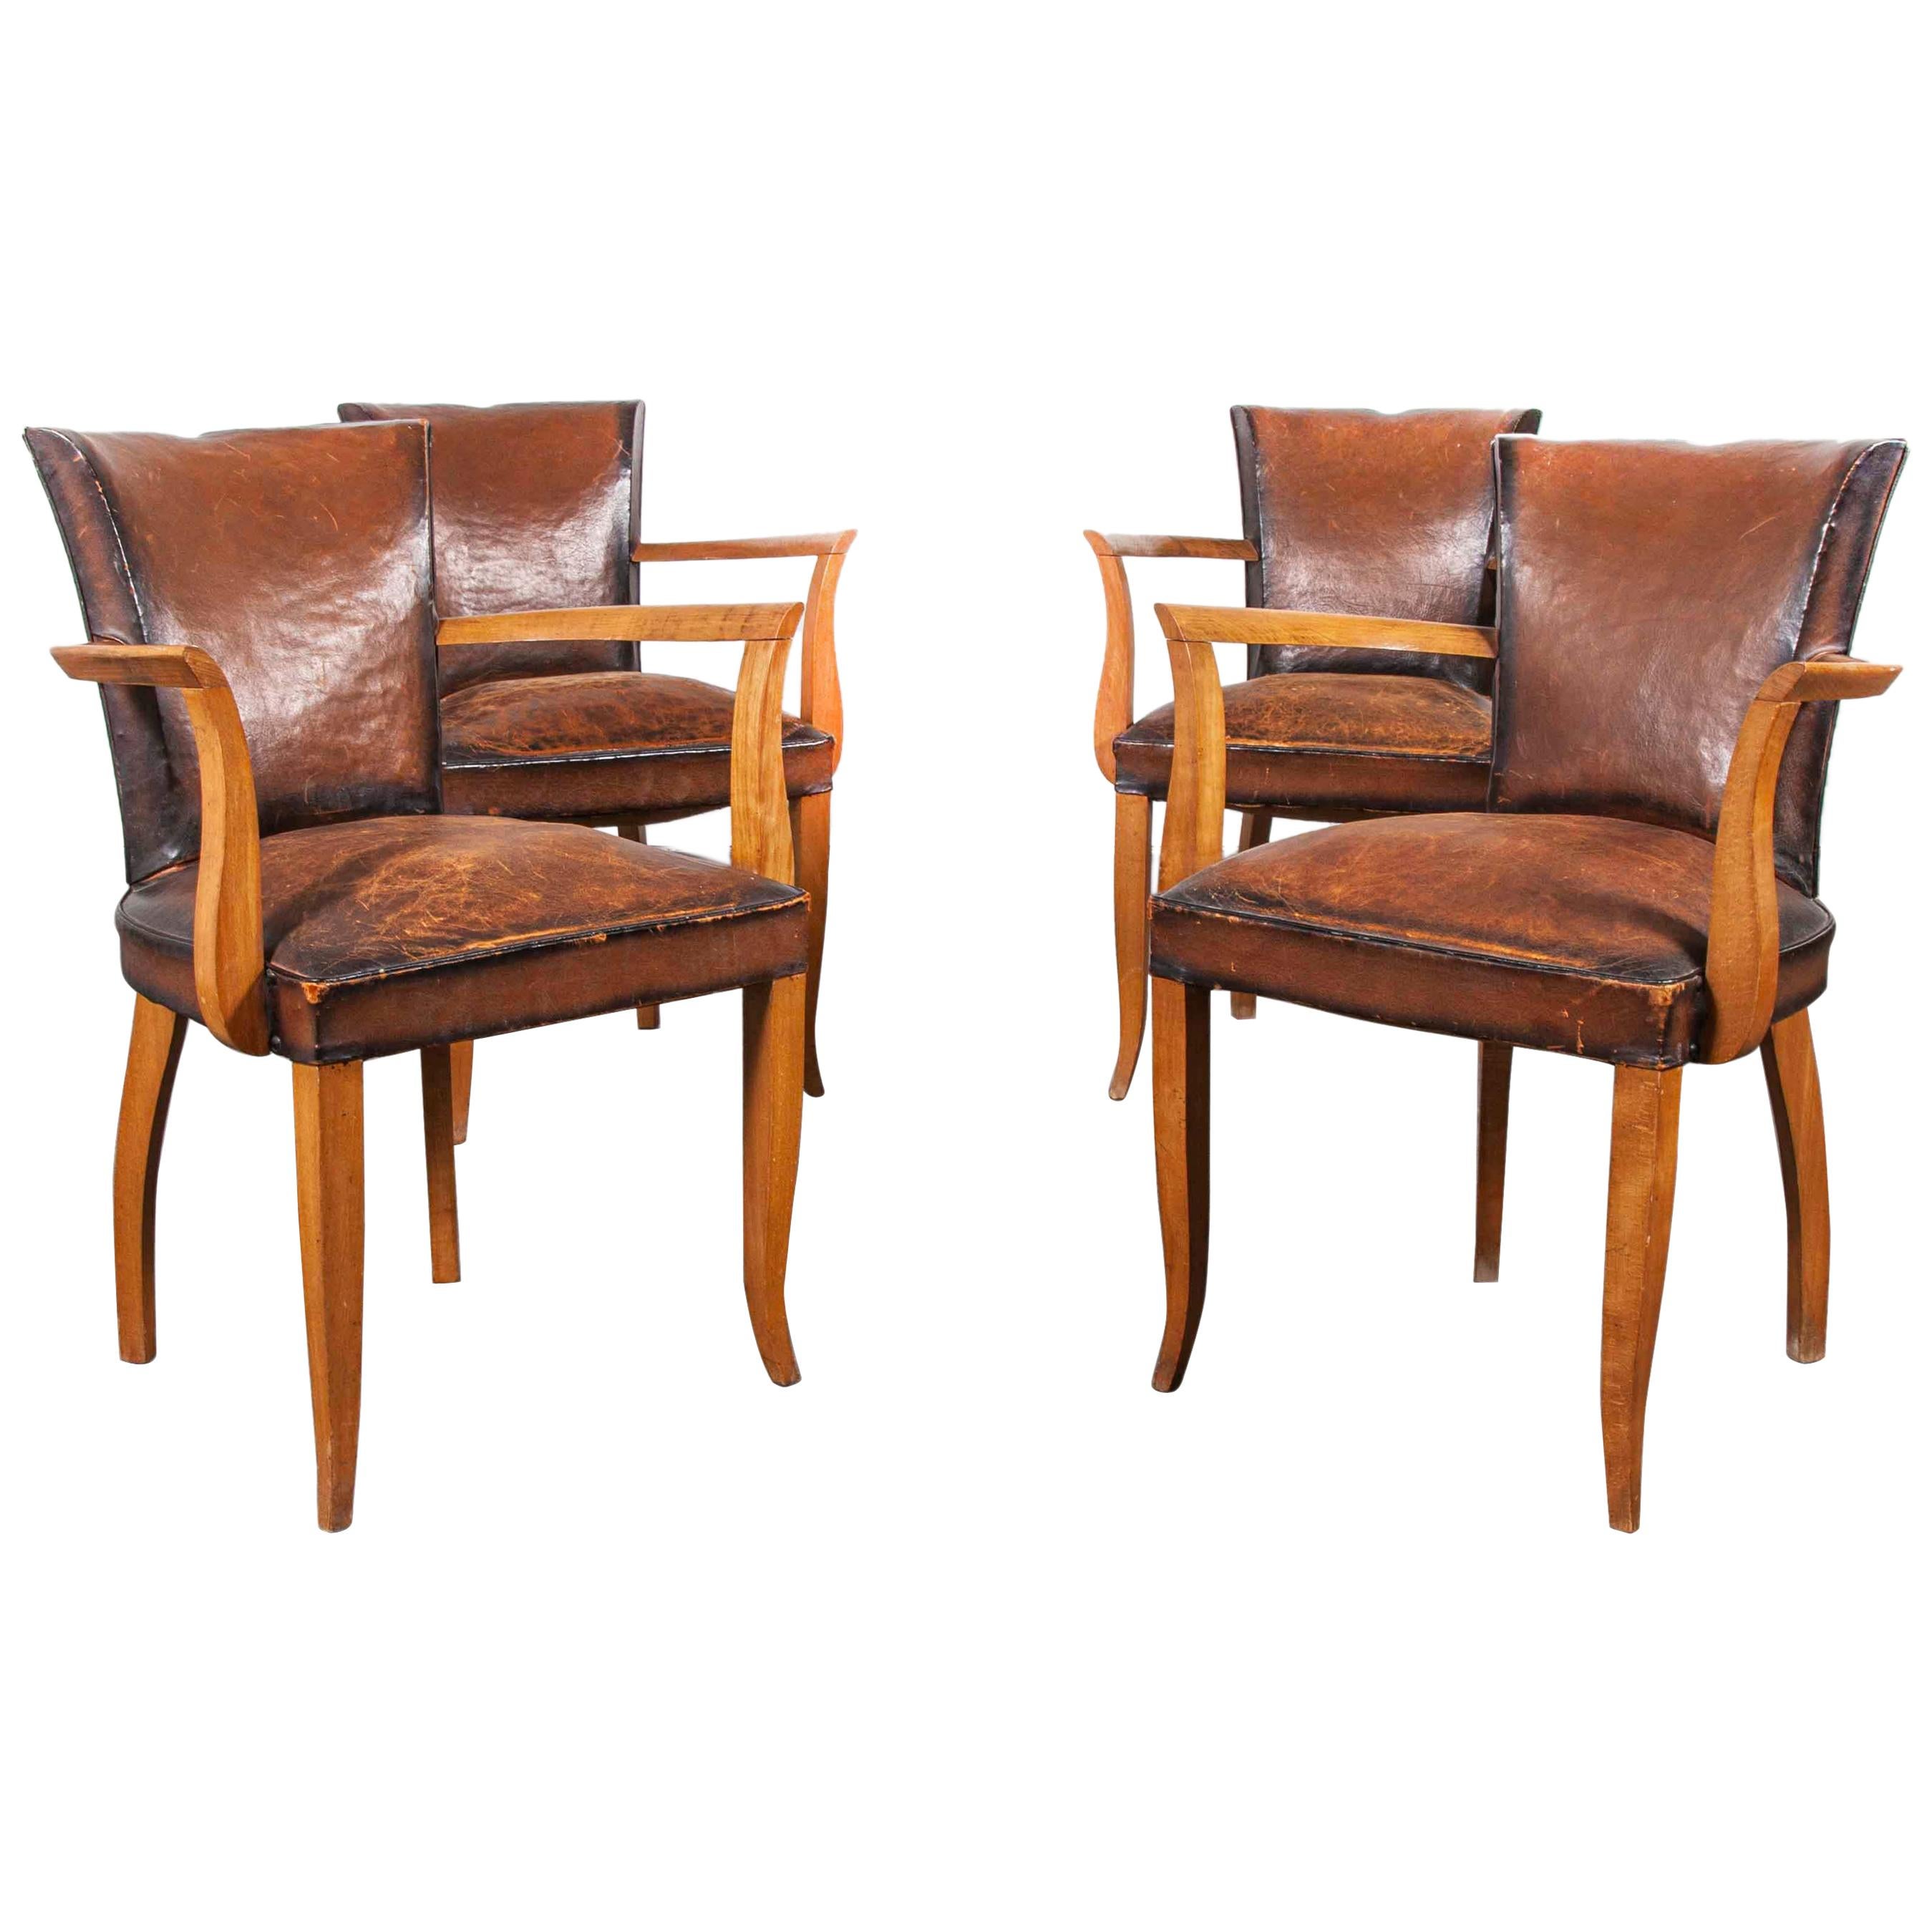 1930s Original Leather French Bridge Chairs, Set of Four